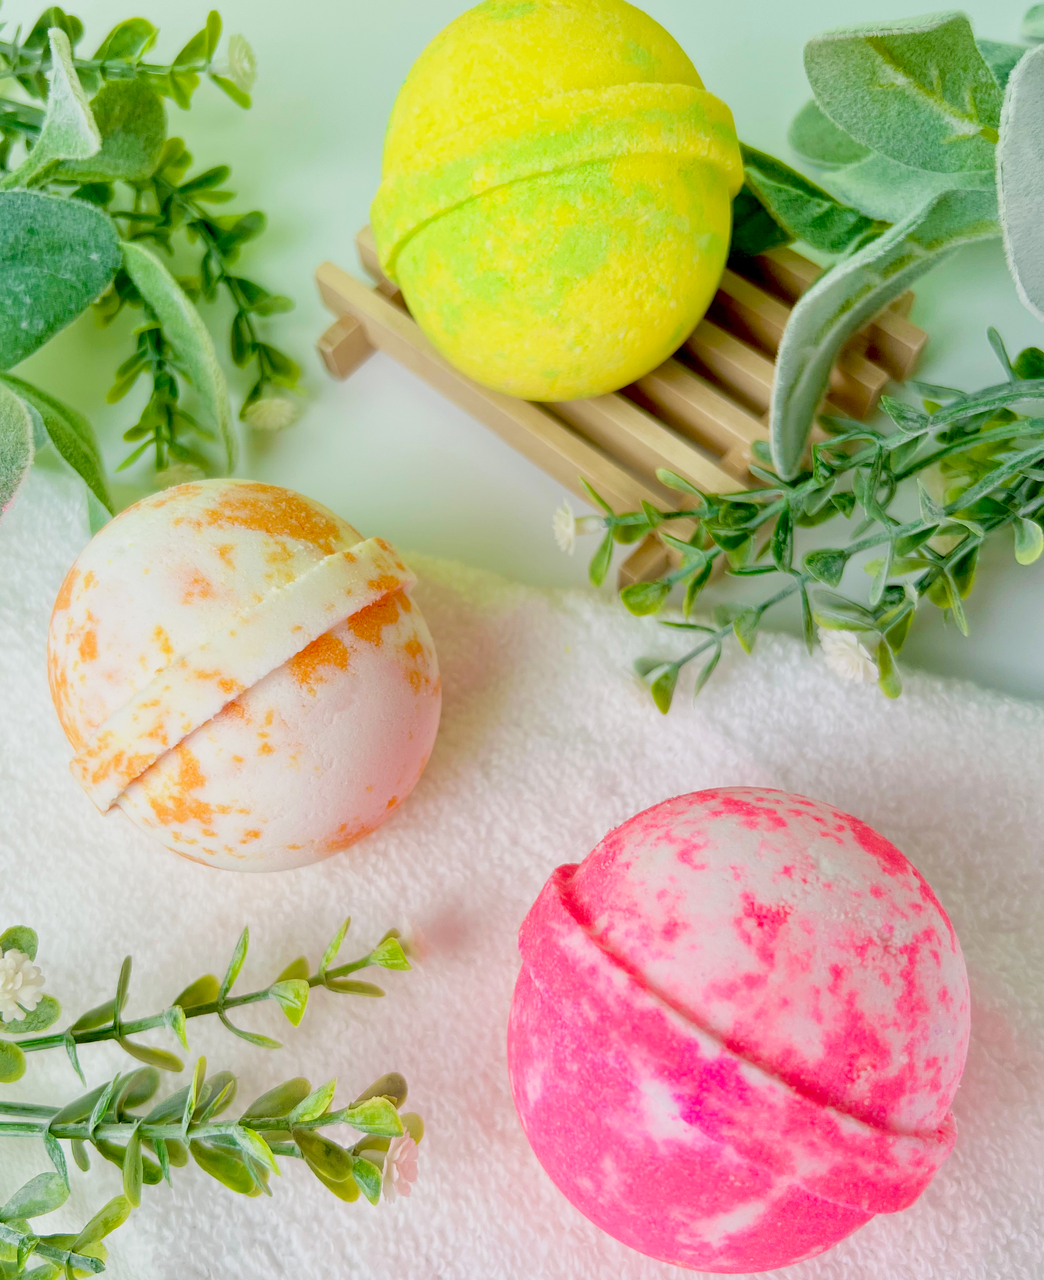 Loving Spell Bath Bomb -Large - Old Town Soap Co.